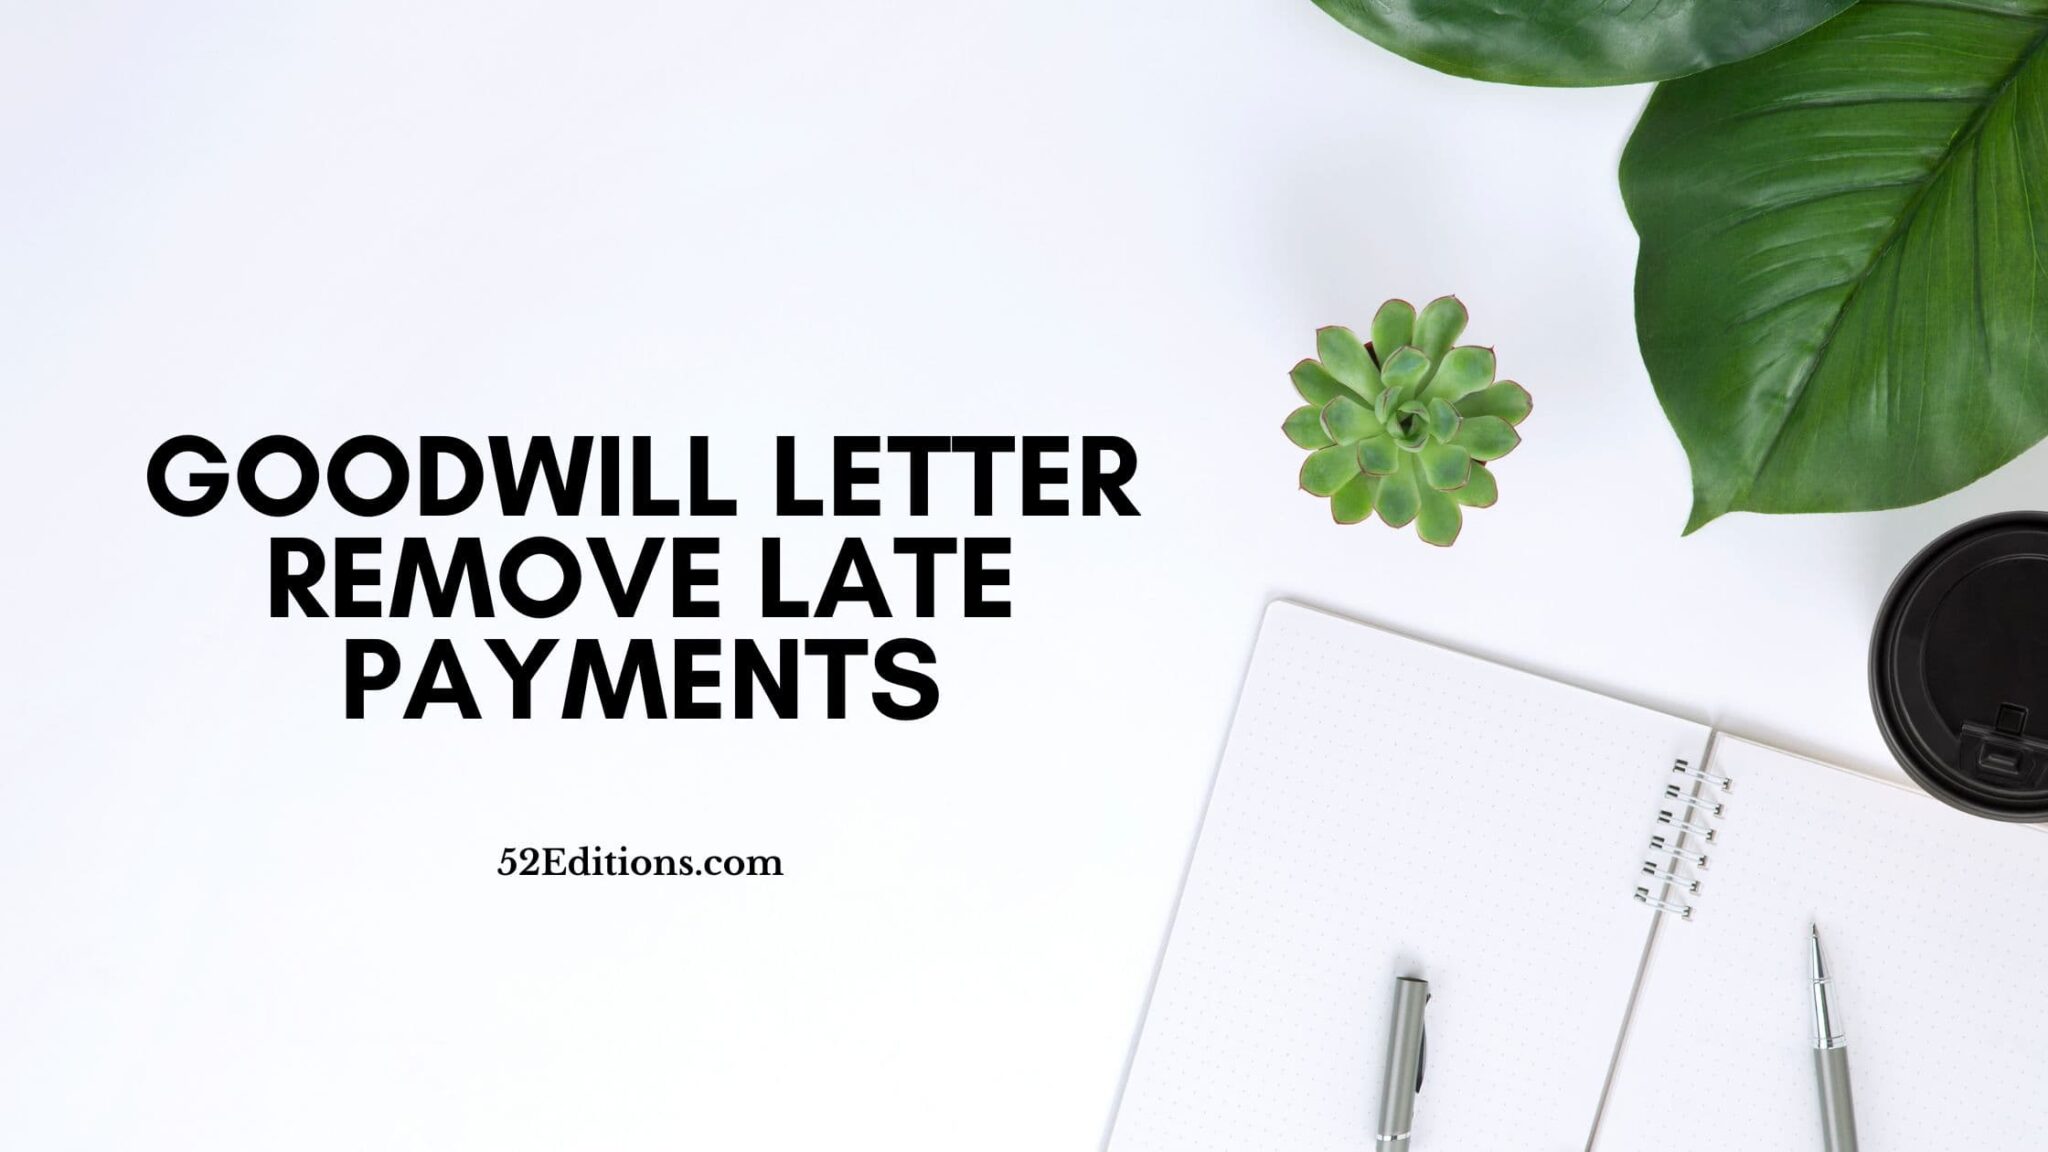 Goodwill Letter Remove Late Payments // Get FREE Letter Templates